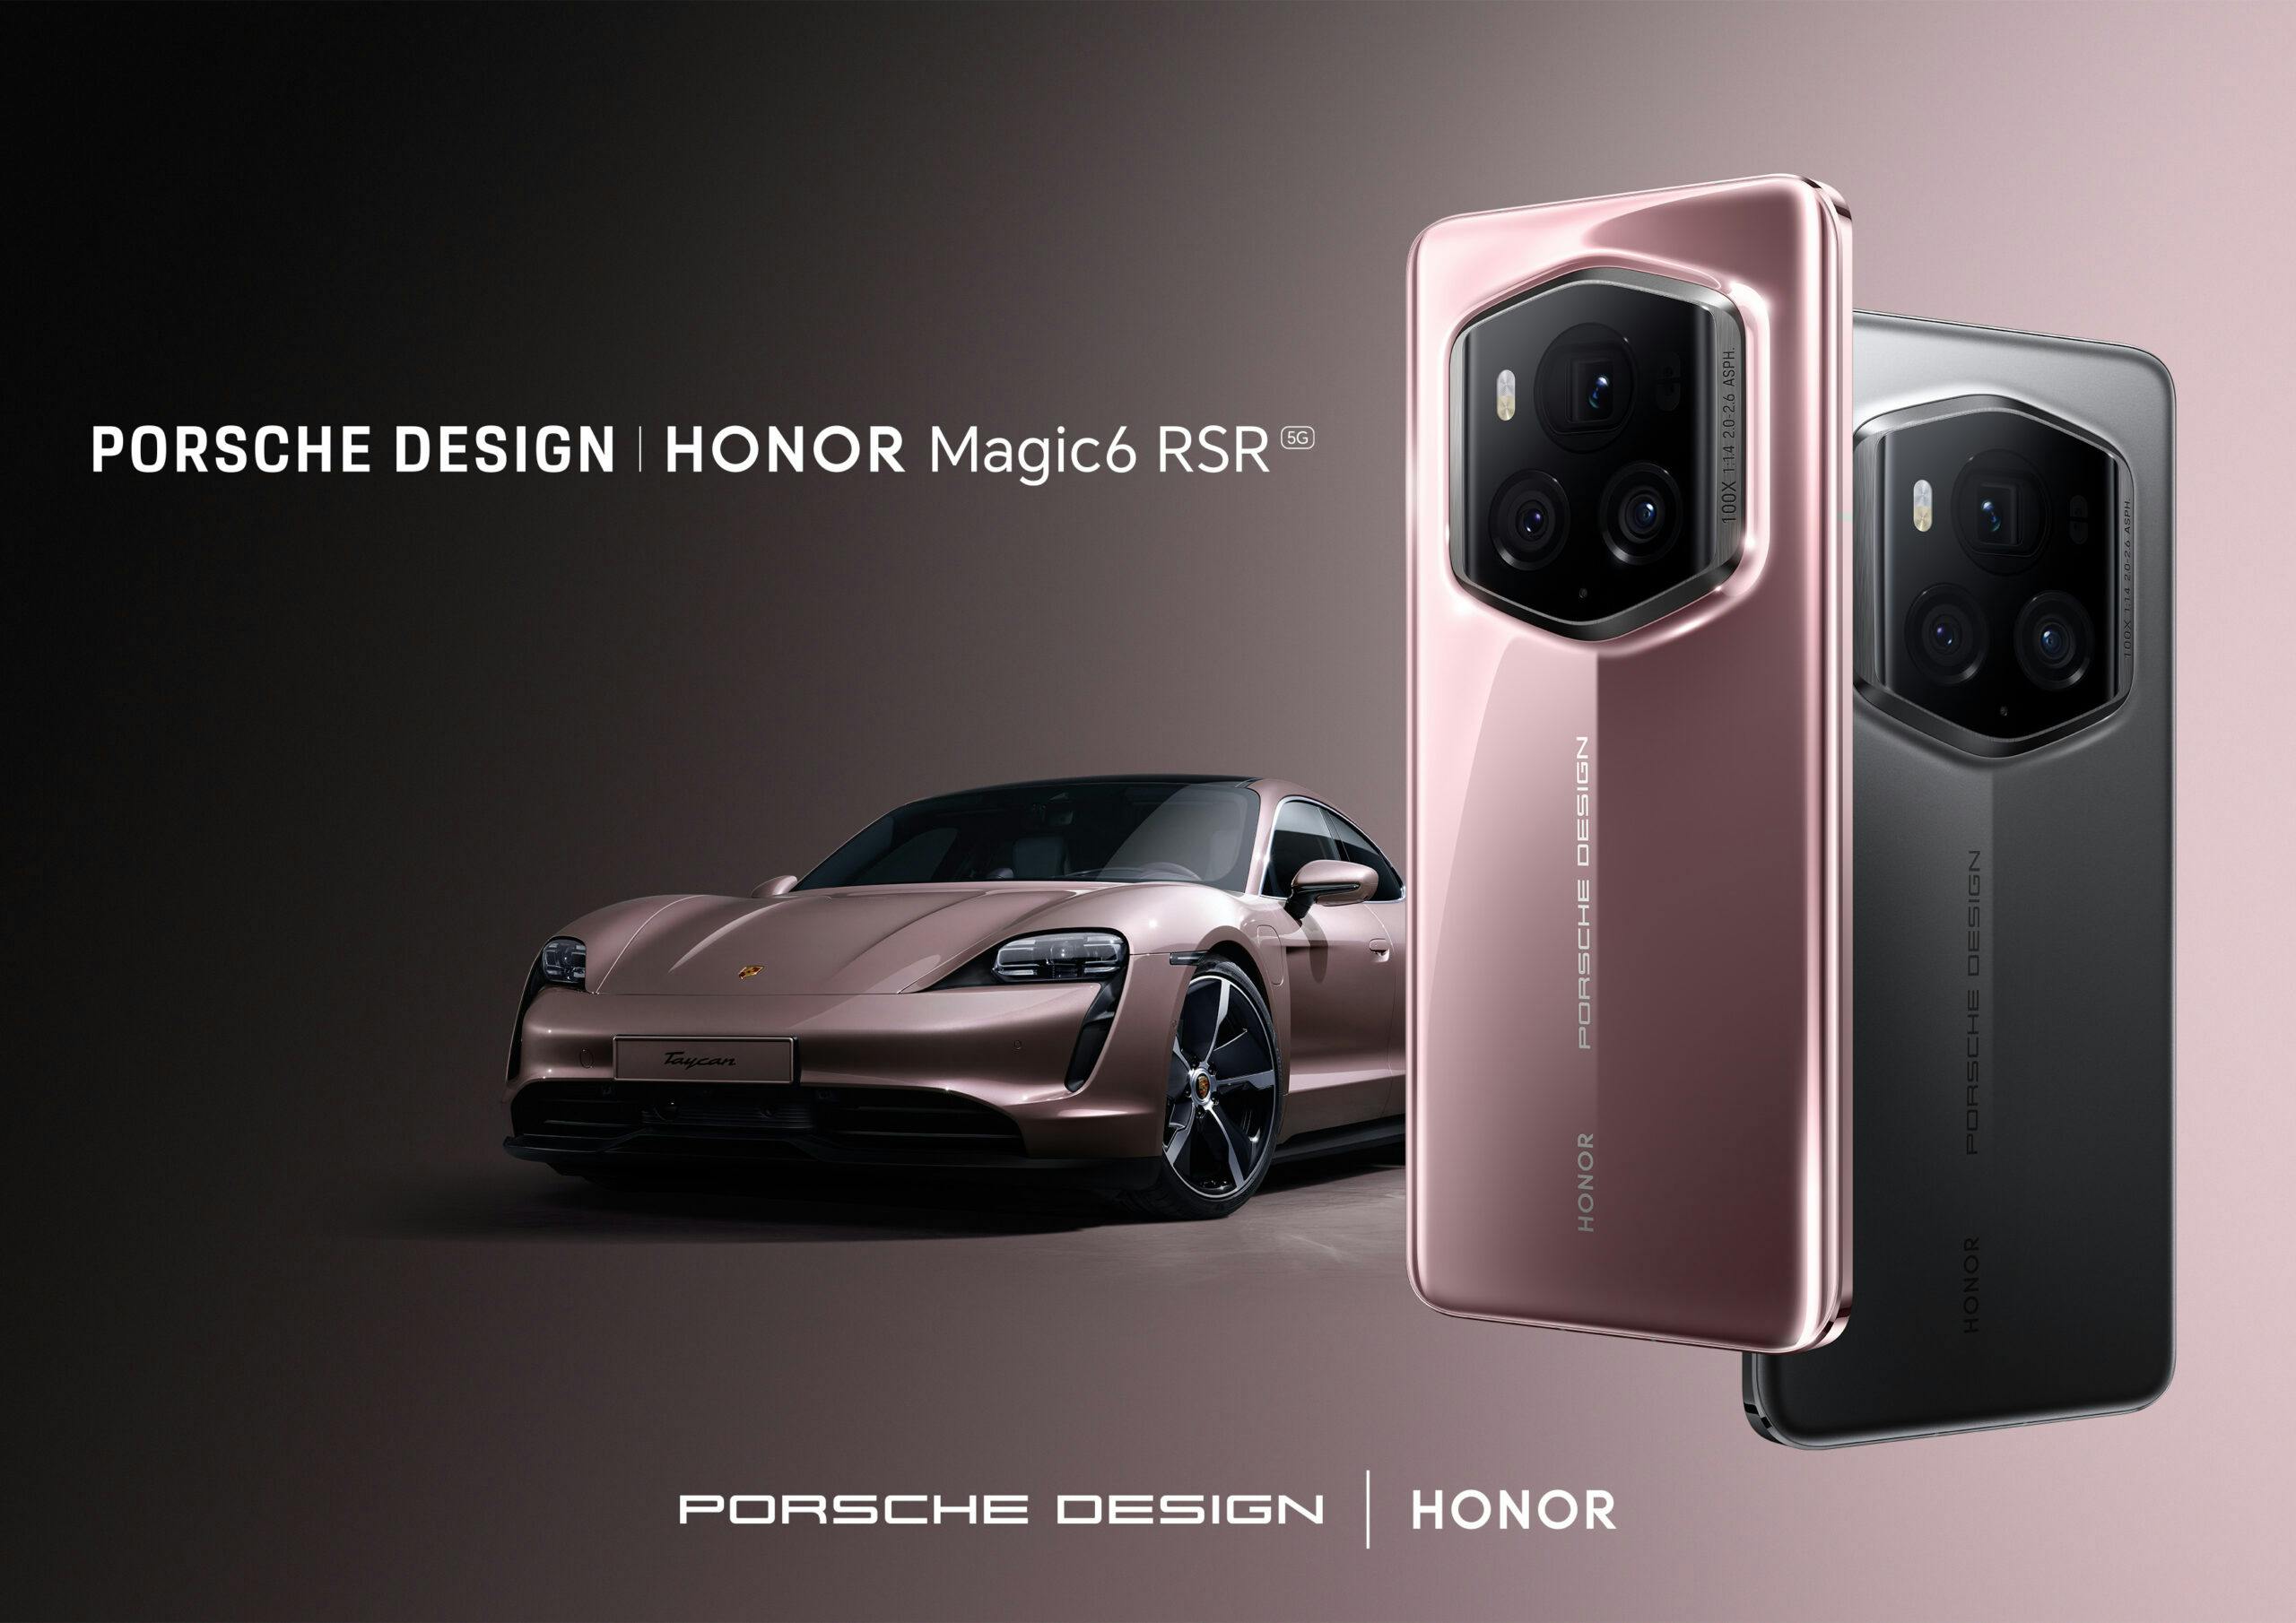 New Luxury Smartphone Impresses With Unique Automotive-inspired Design and Outstanding User Experience